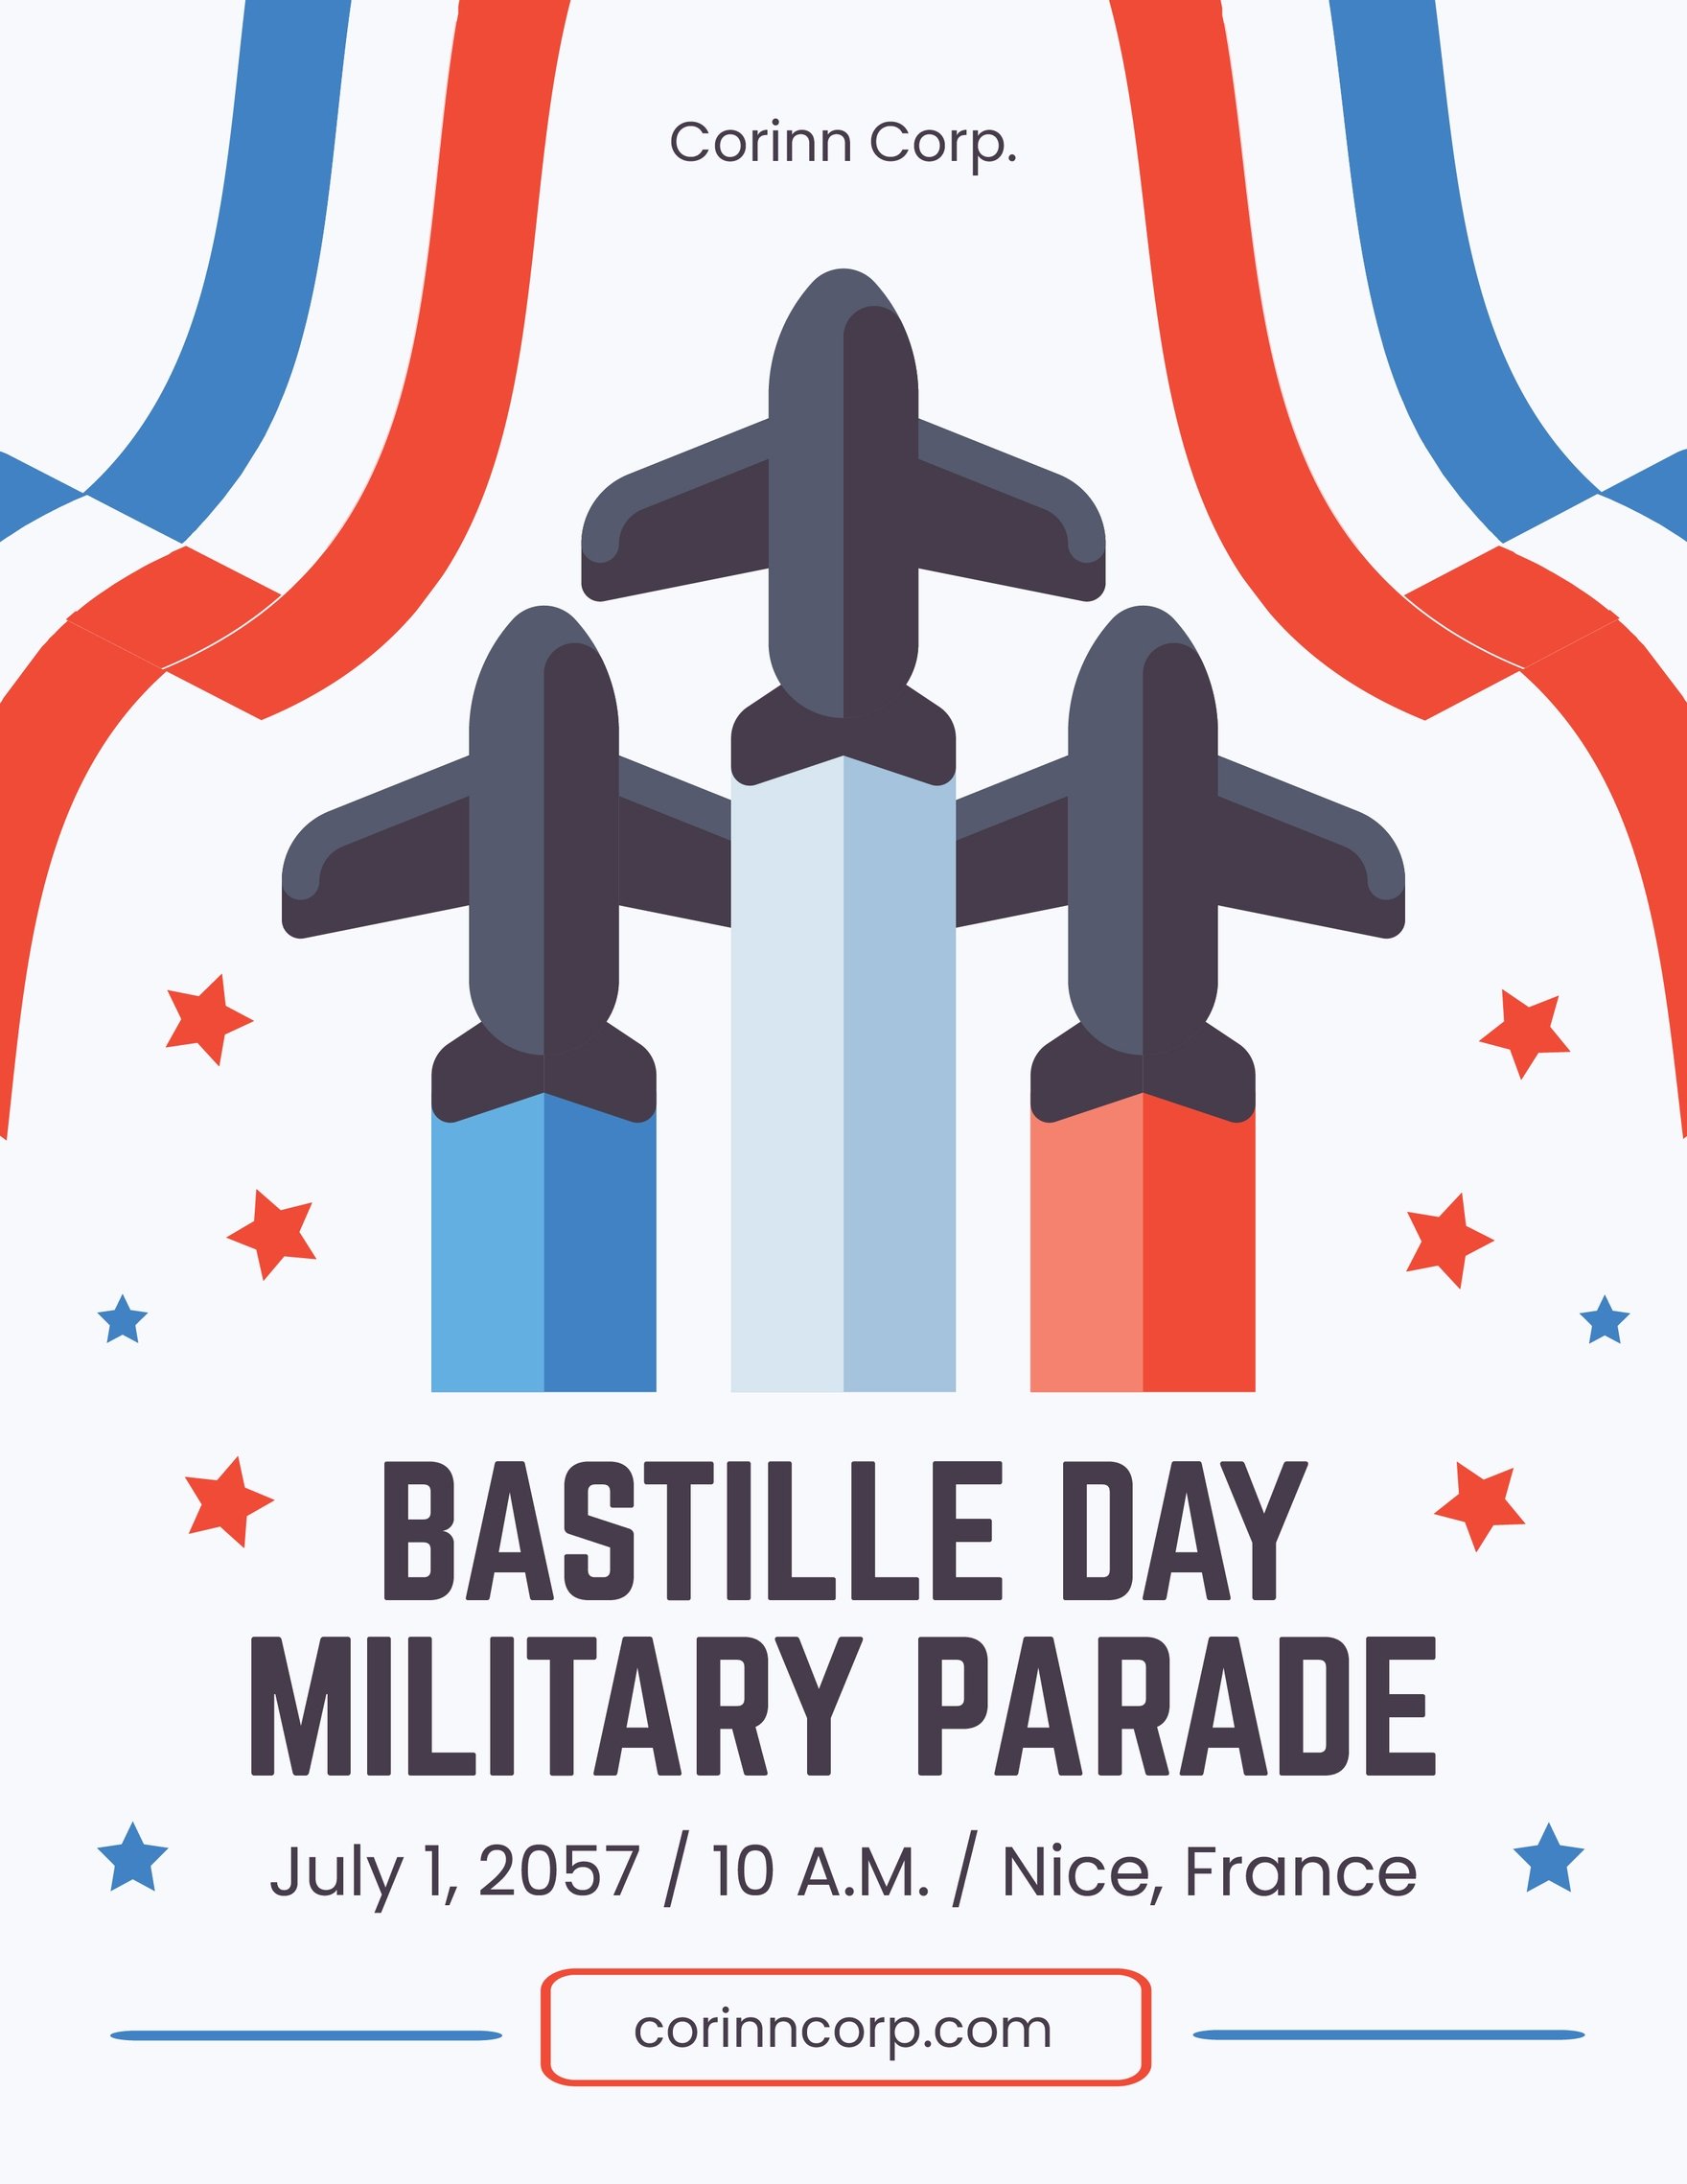 Bastille Day Military Parade Flyer in Word, Google Docs, Illustrator, PSD, Apple Pages, Publisher